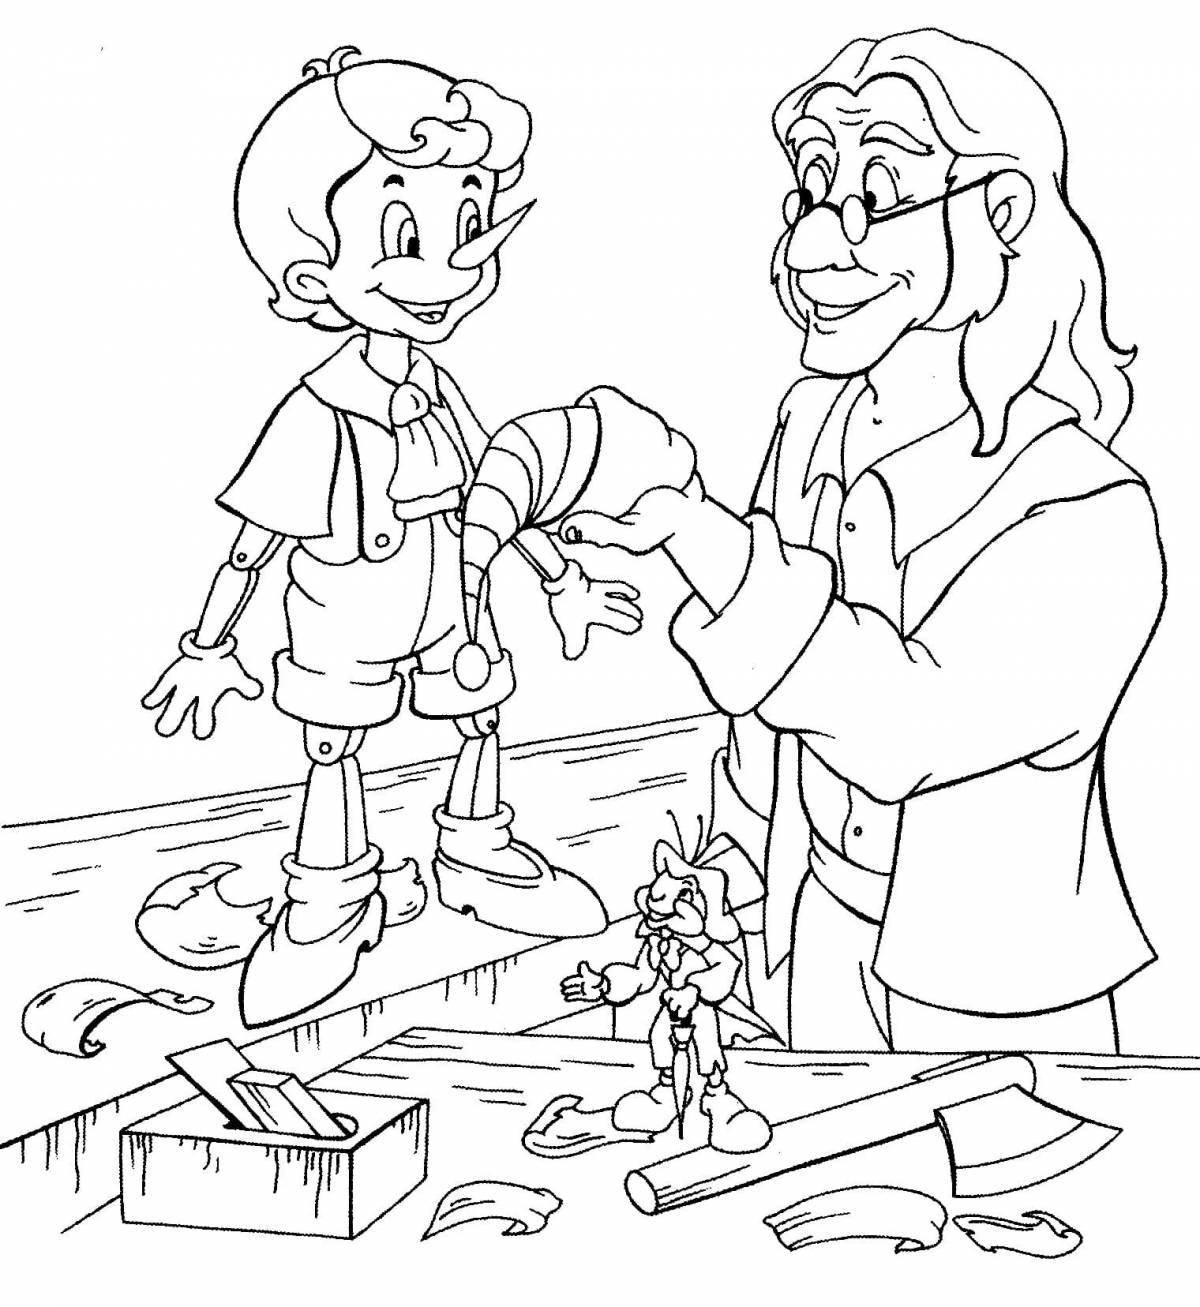 Fancy pinocchio coloring page